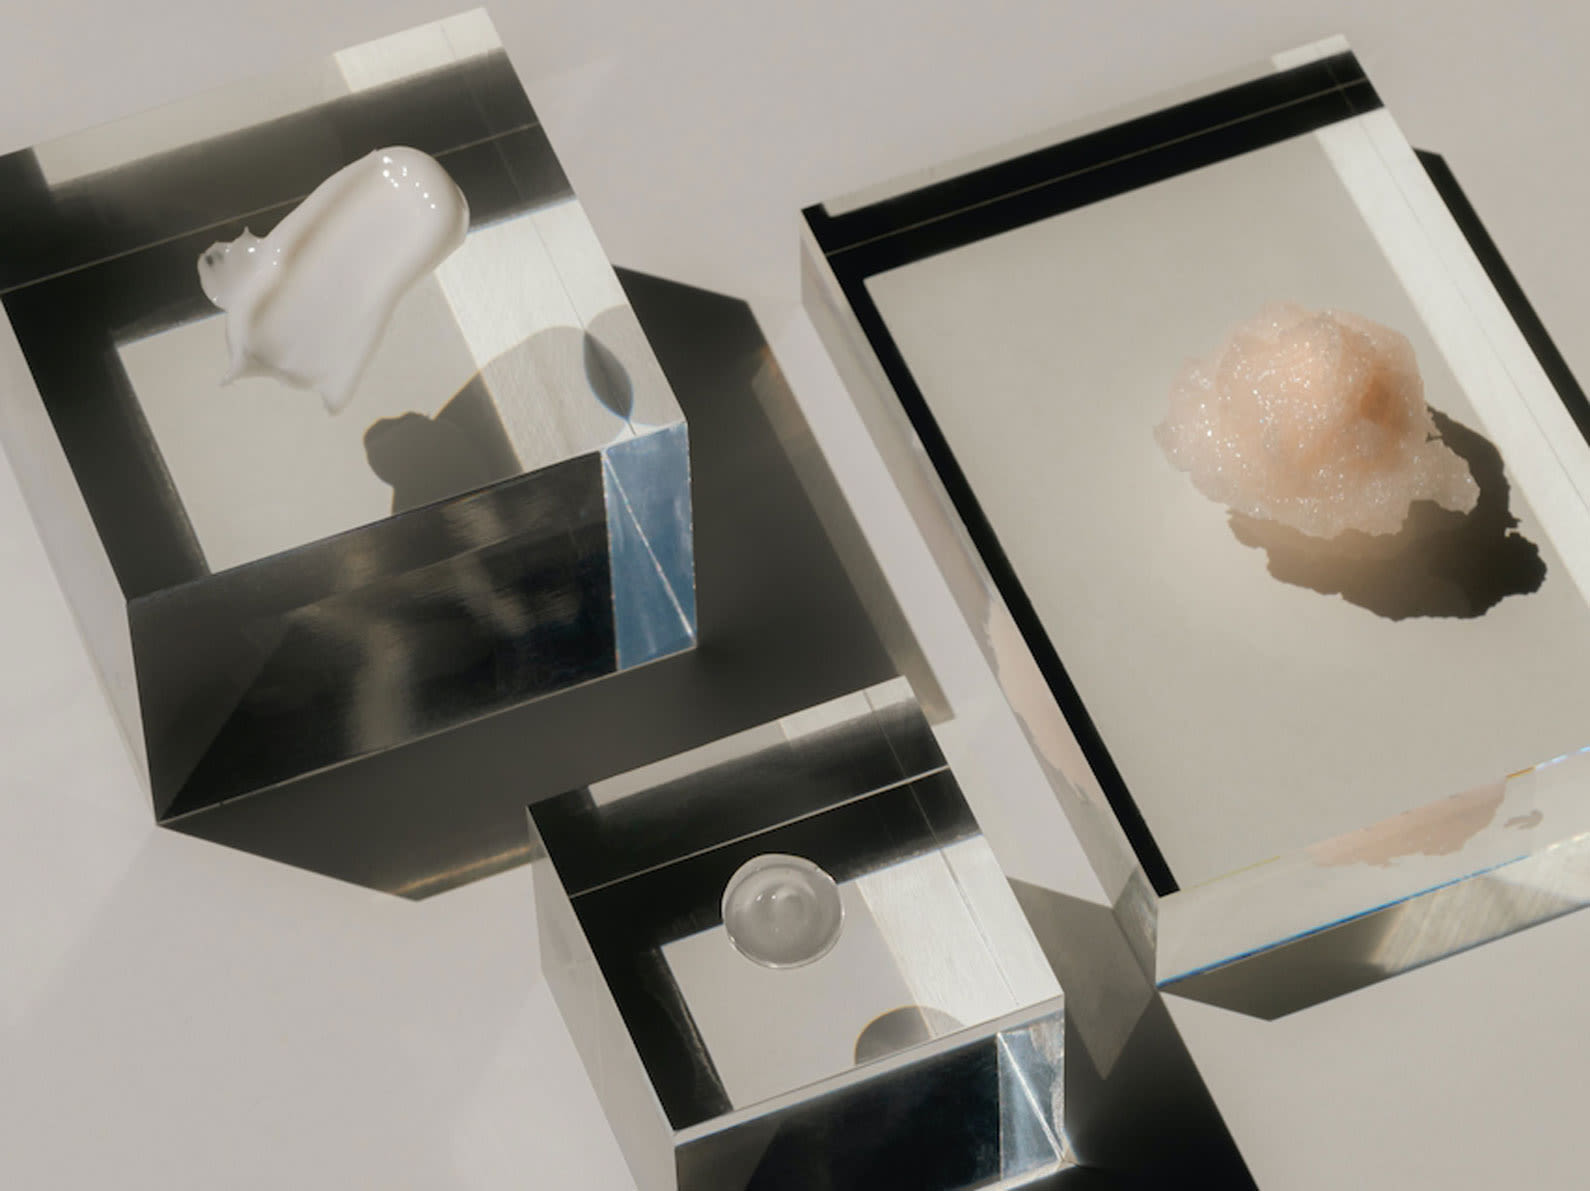 Skincare texture on glass cubes